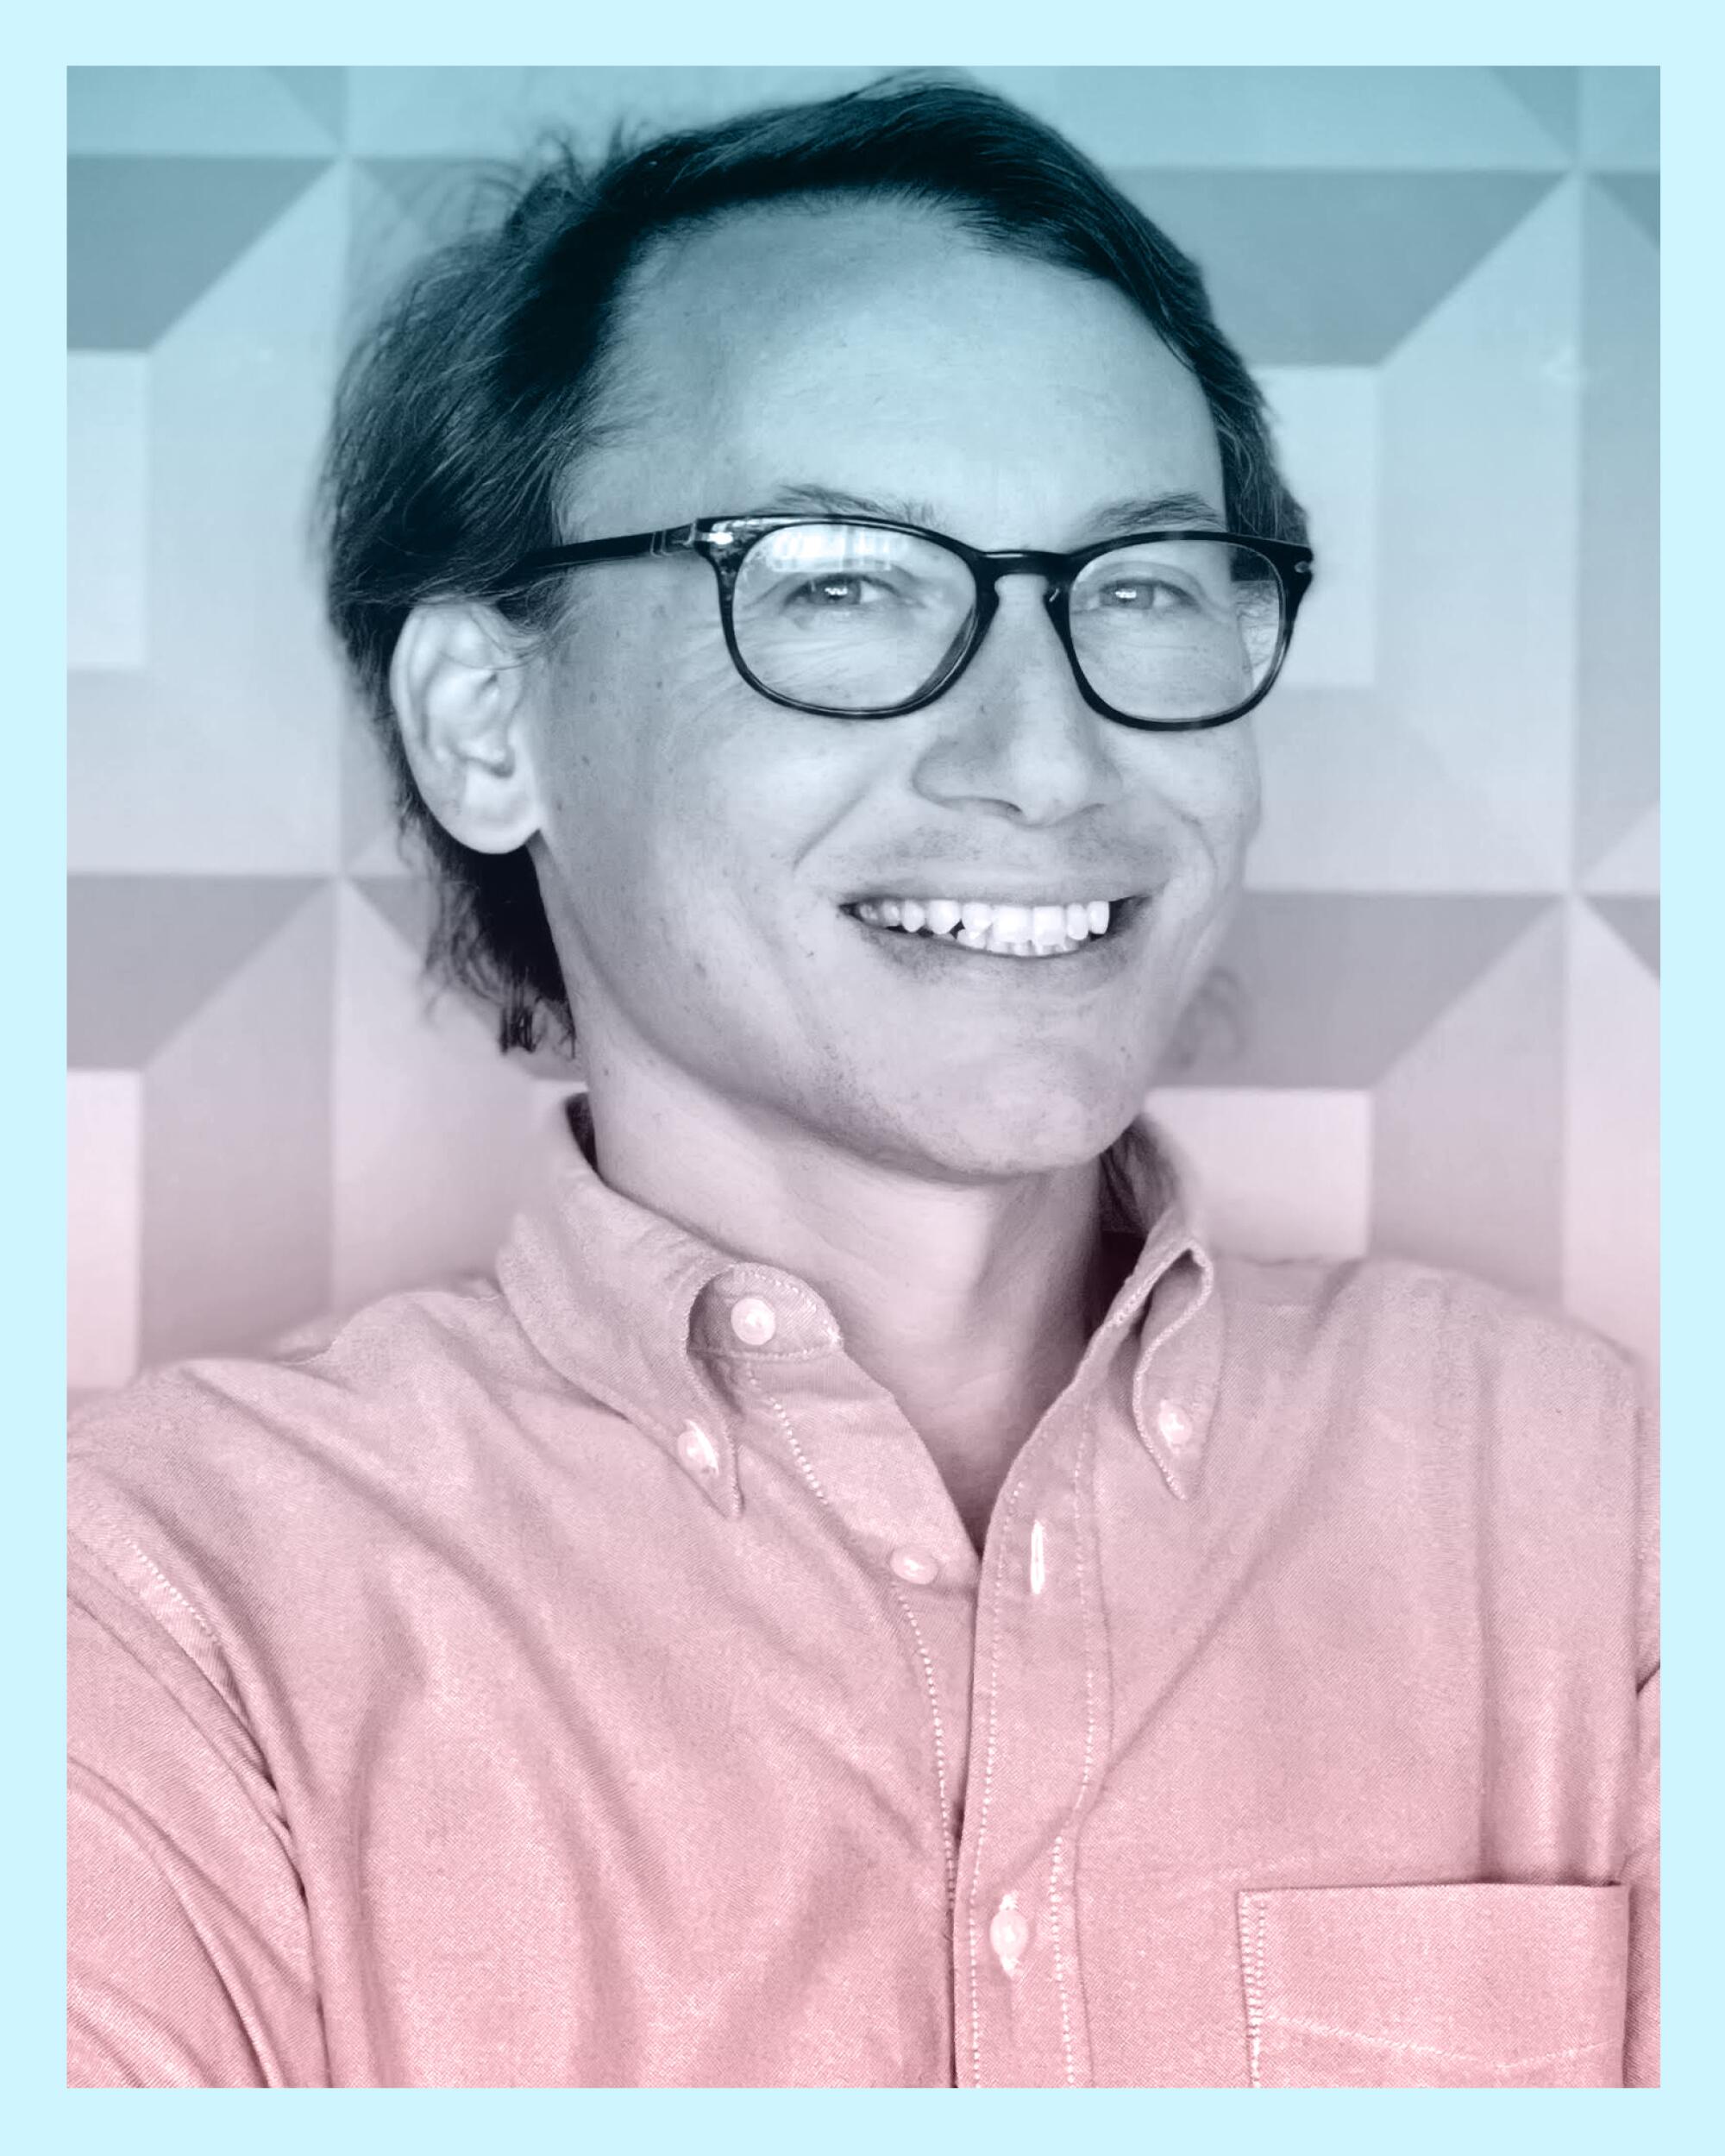 A smiling man in glasses and a button-down shirt